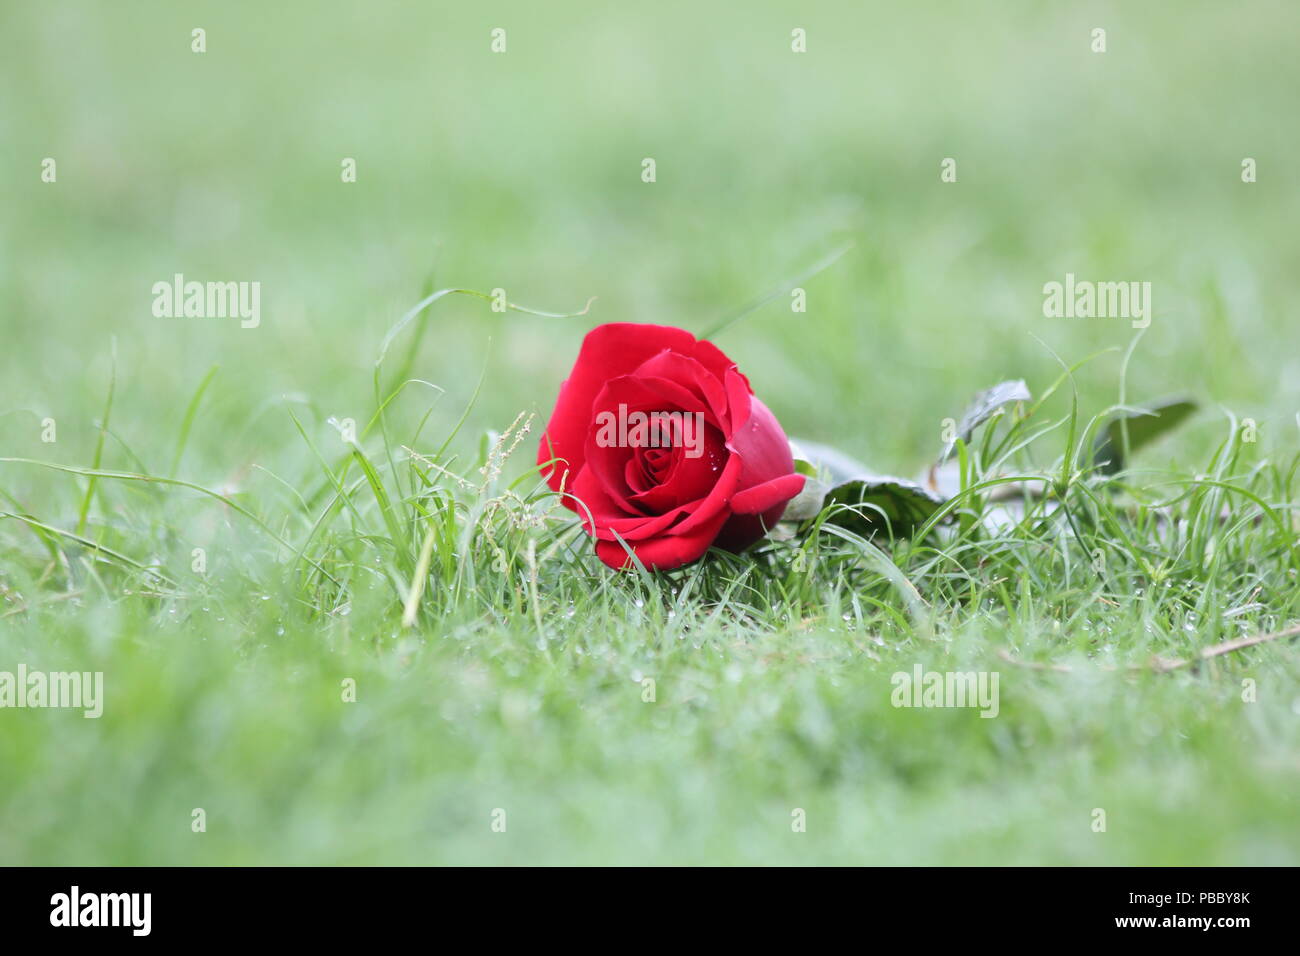 A red rose isolated on green grass background, Stock Photo